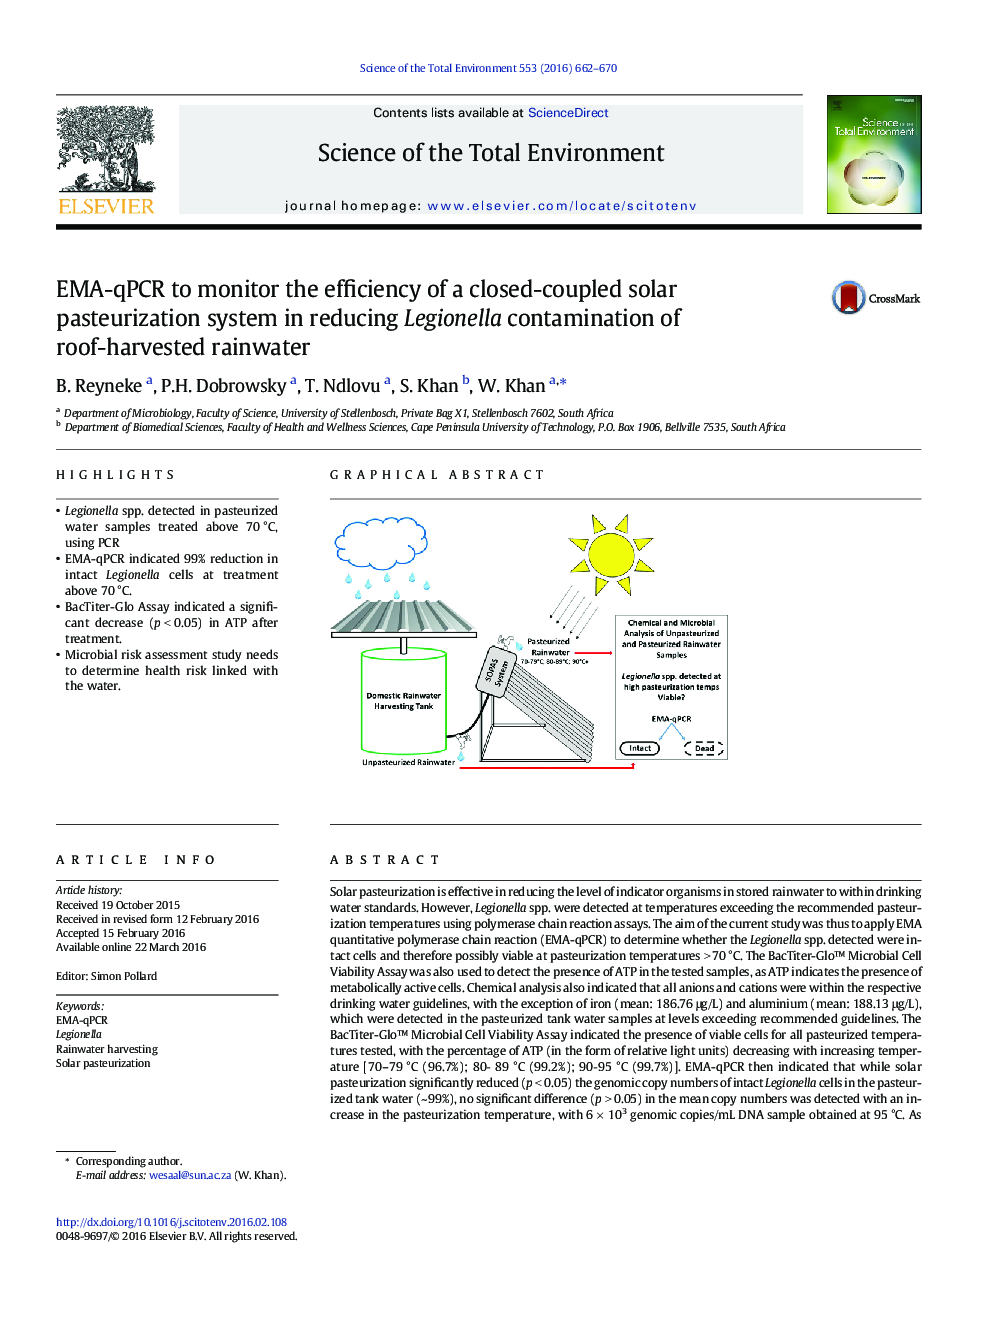 EMA-qPCR to monitor the efficiency of a closed-coupled solar pasteurization system in reducing Legionella contamination of roof-harvested rainwater